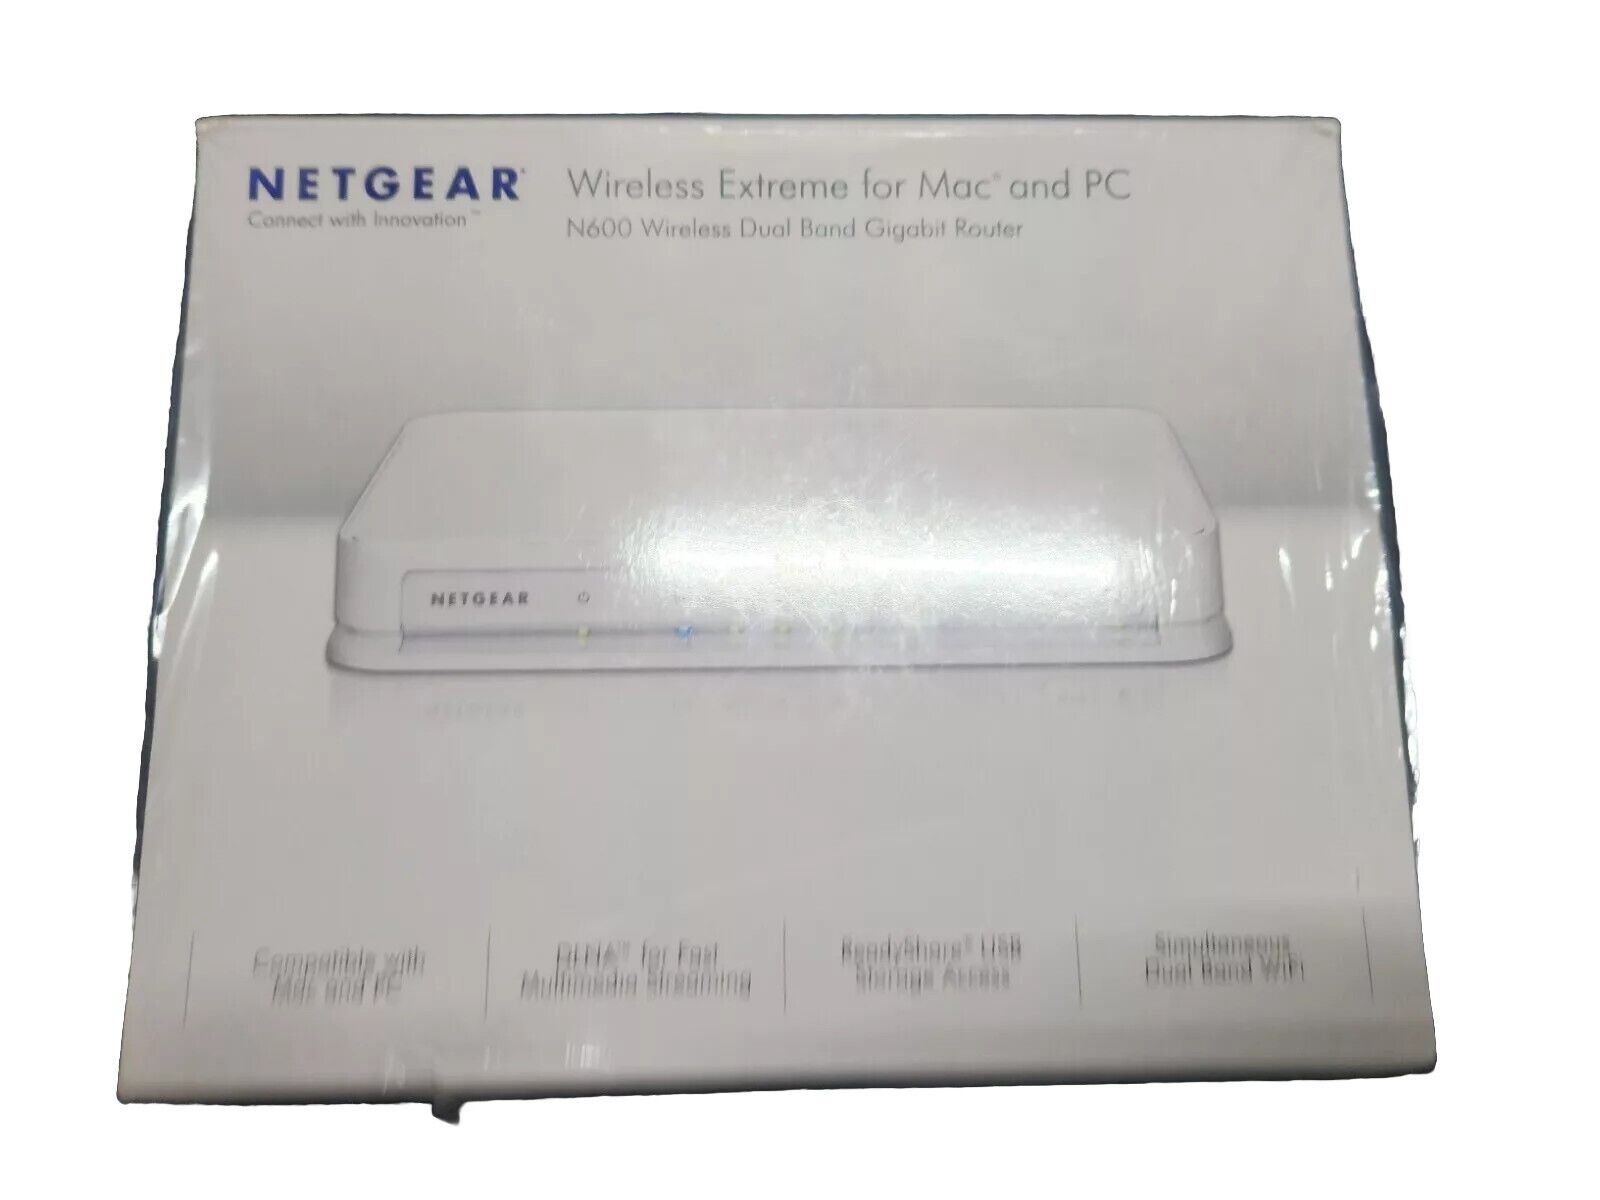 NETGEAR N600 Dual Band Wi-Fi Gigabit Router for Mac and PC - New in Box - sealed